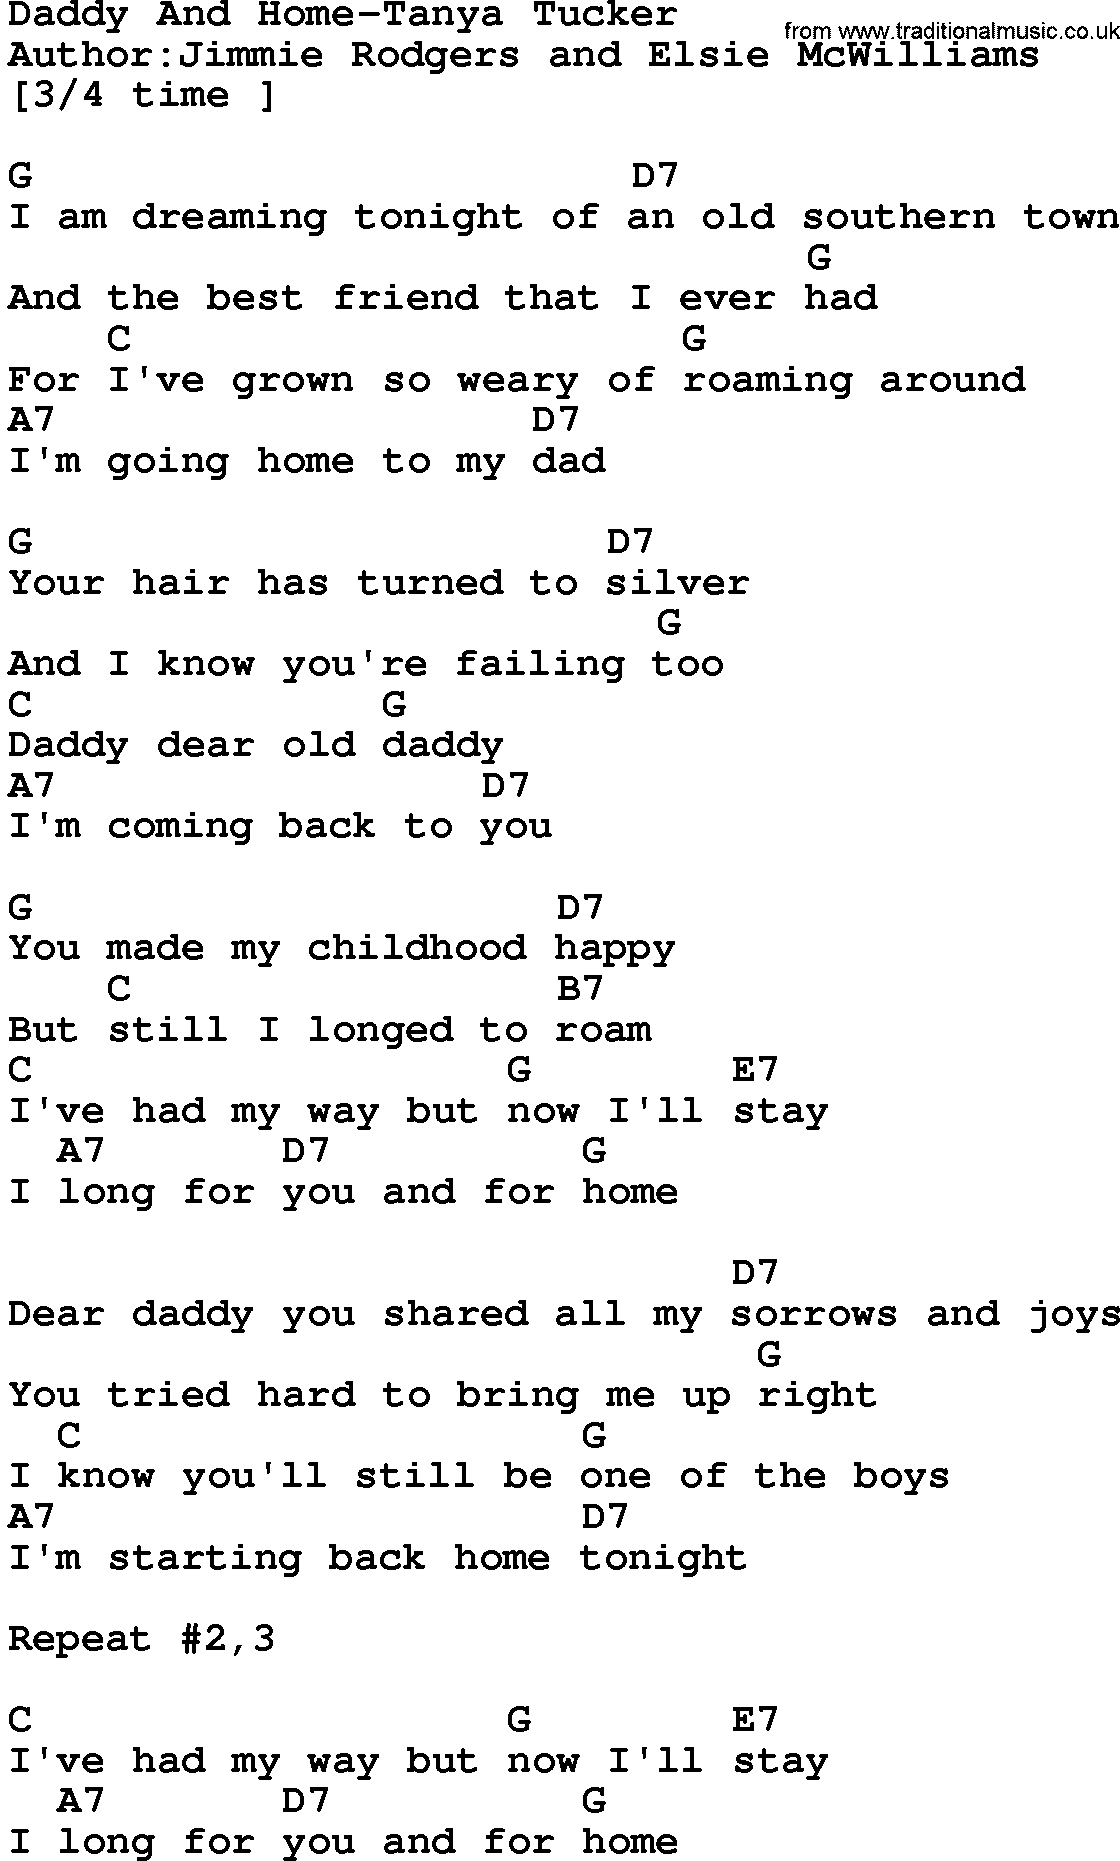 Country music song: Daddy And Home-Tanya Tucker lyrics and chords